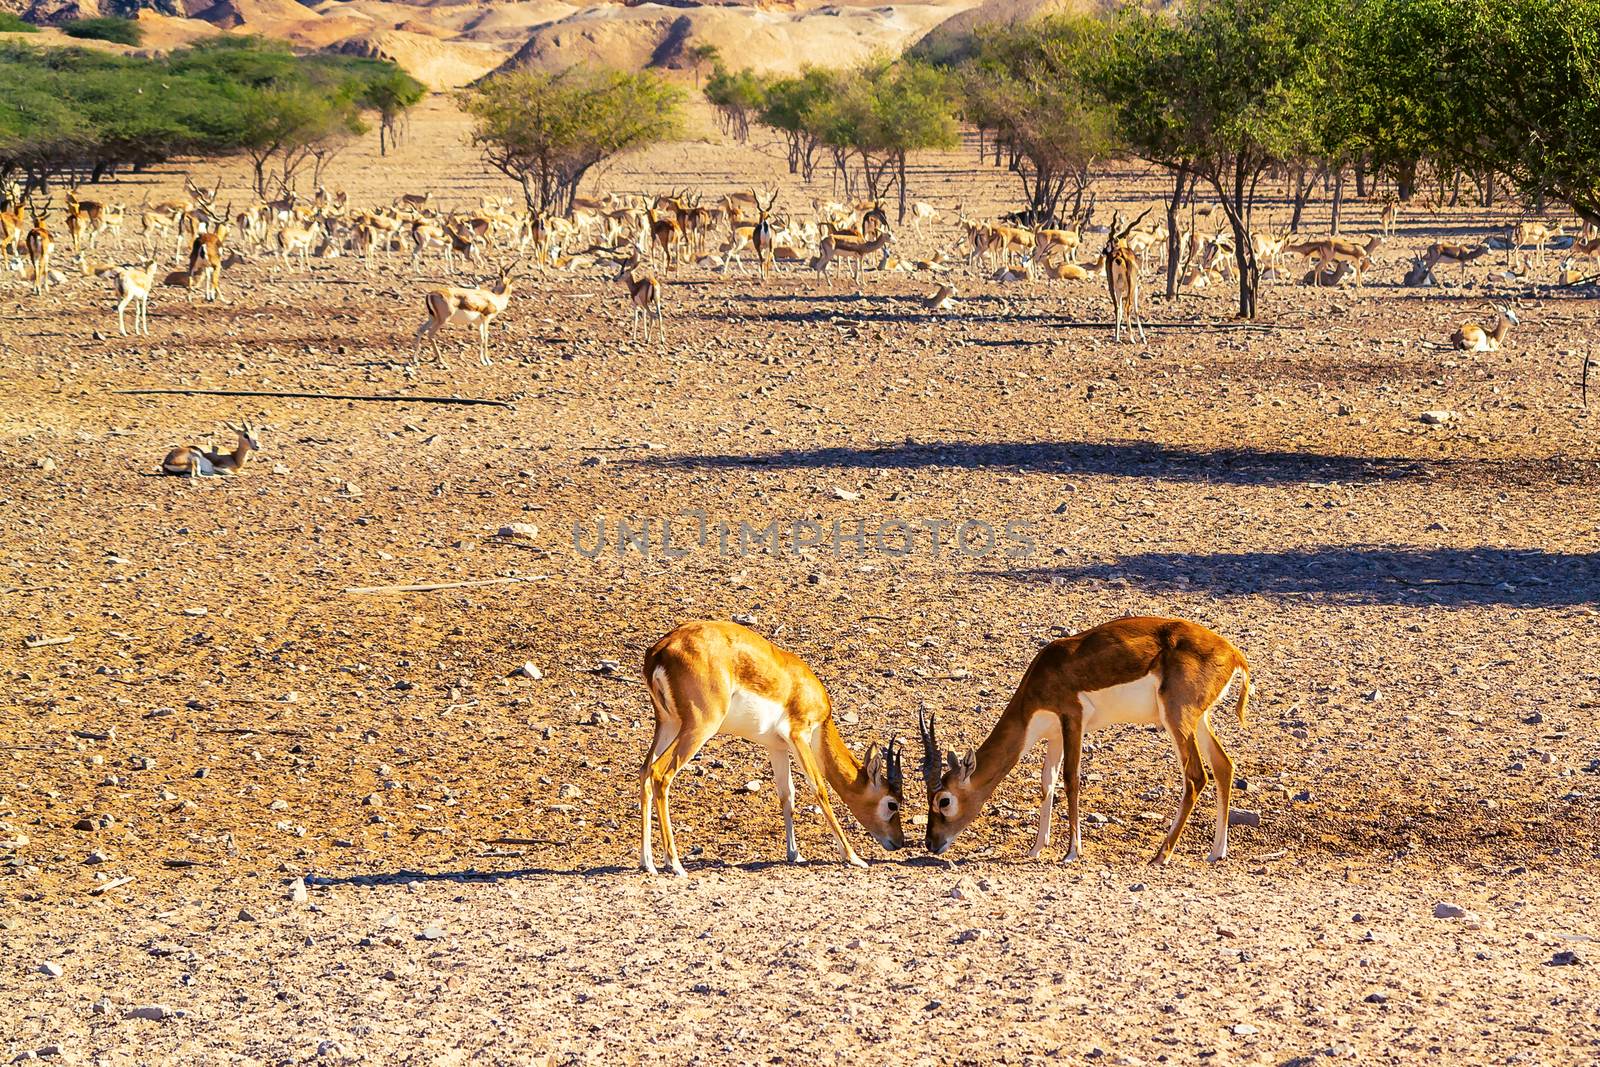 Fight of two young antelopes in a safari park on Sir Bani Yas Island, Abu Dhabi, UAE by galsand